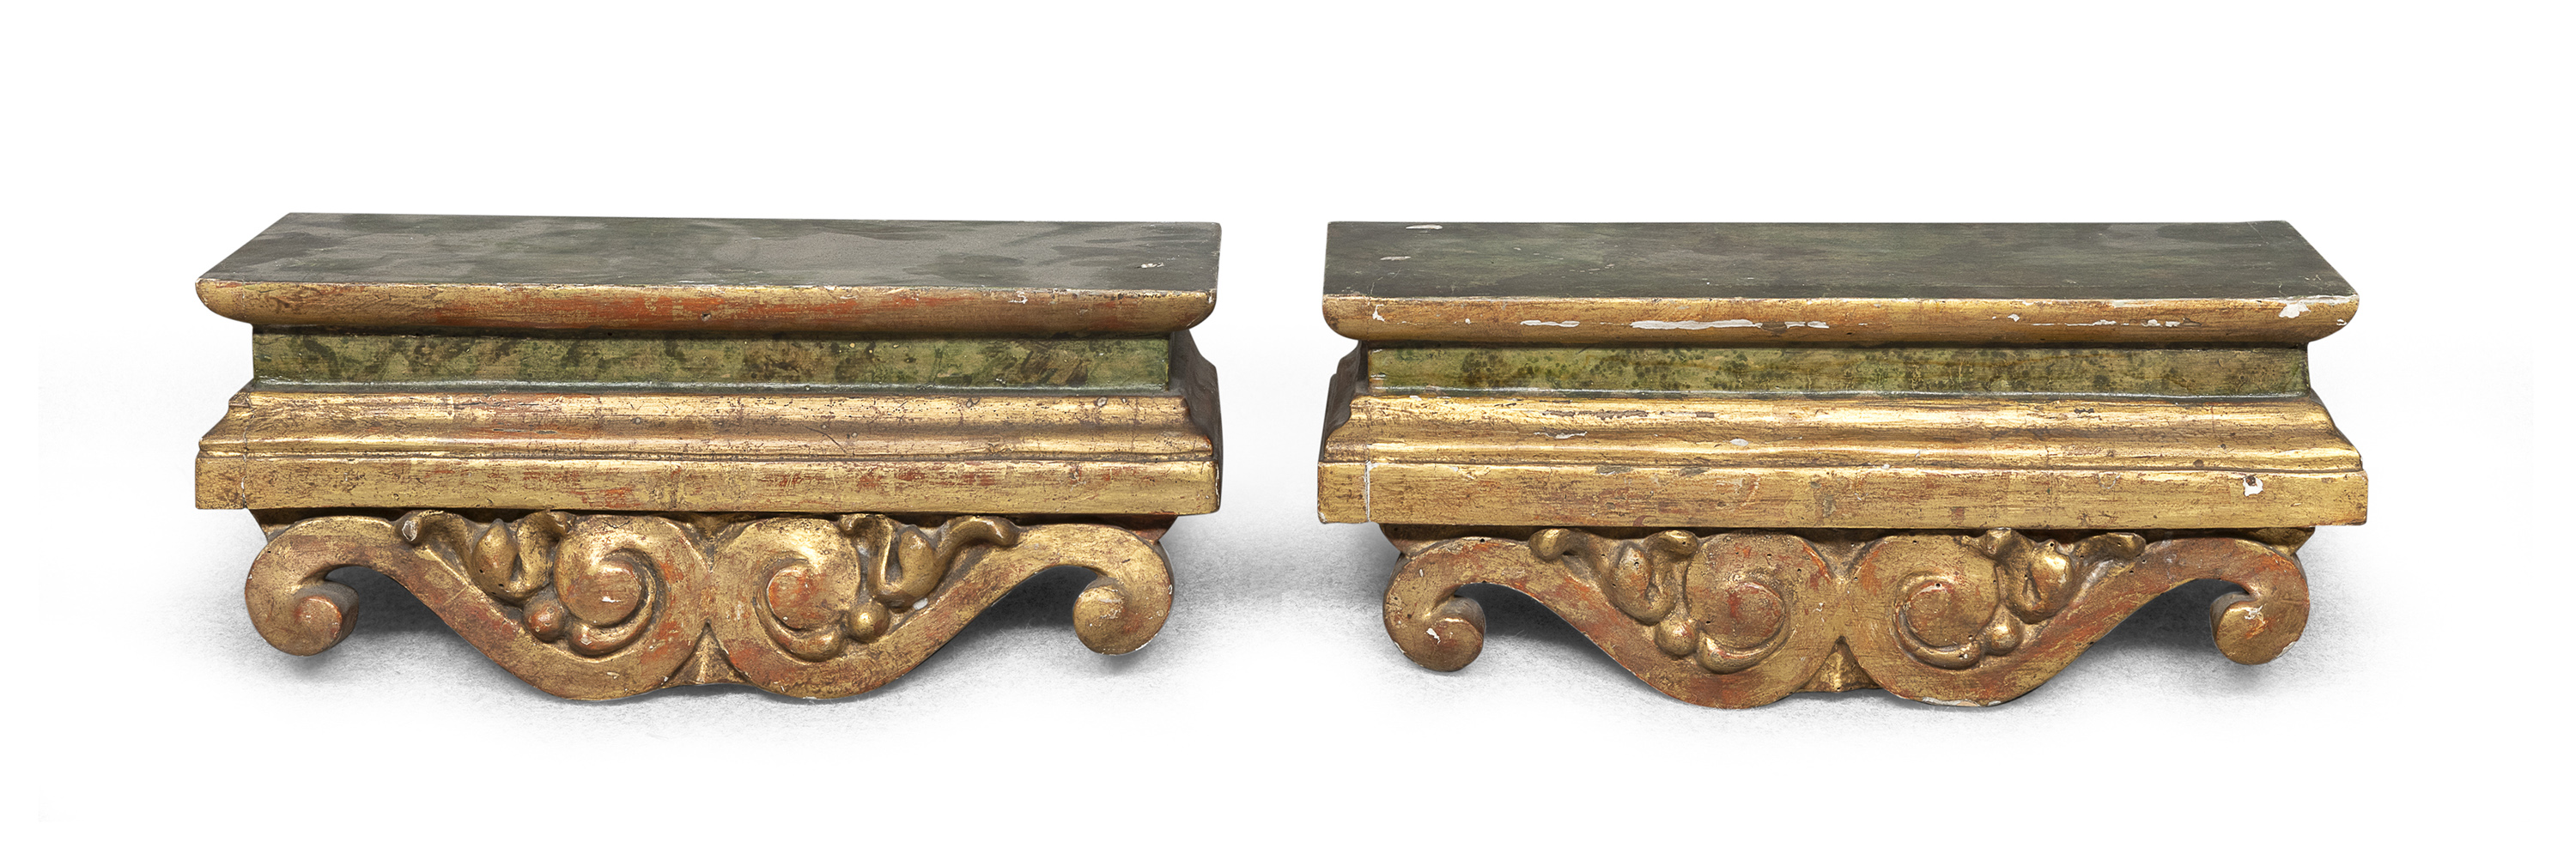 PAIR OF SMALL SHELVES IN LACQUERED AND GILT WOOD 18TH CENTURY